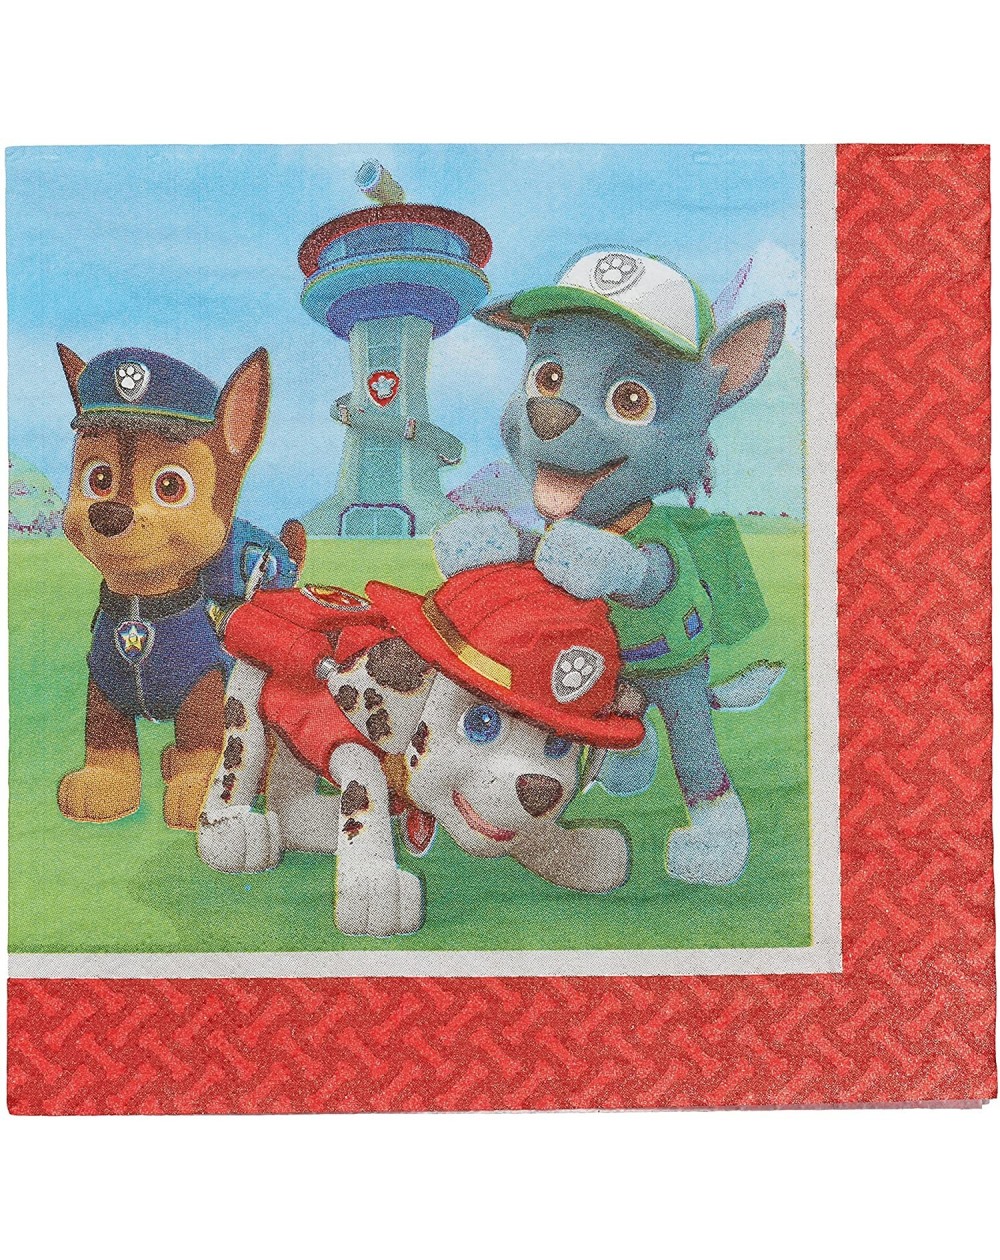 Tablecovers Paw Patrol Paper Lunch Napkins for Kids (16-Count) (581462) - Paper Lunch Napkins - CA11U91UJ7B $7.57